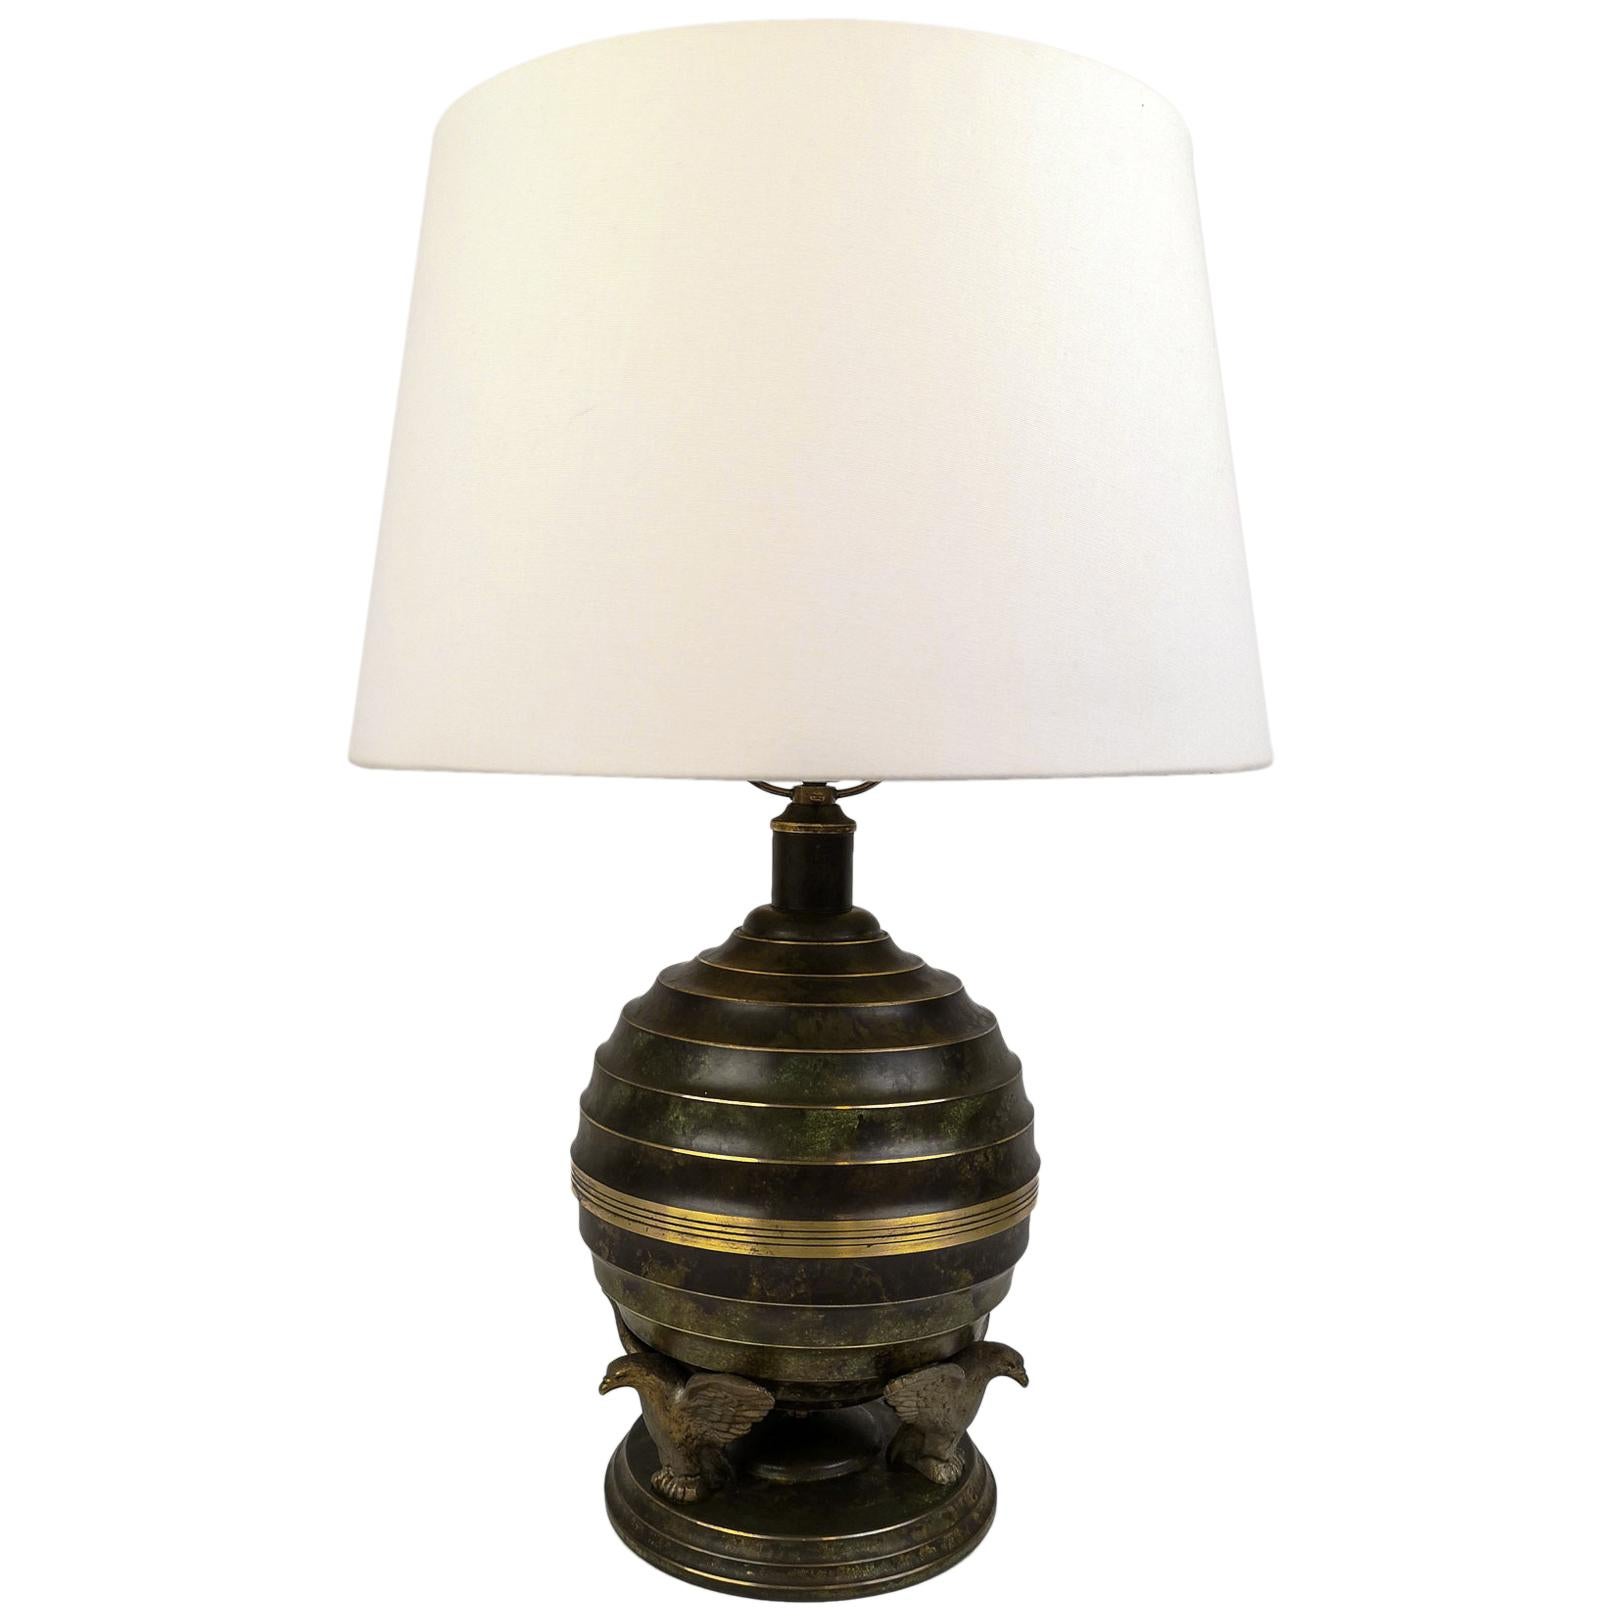  Art Deco Table Lamp in Bronze and Brass by SVM Handarbete Sweden